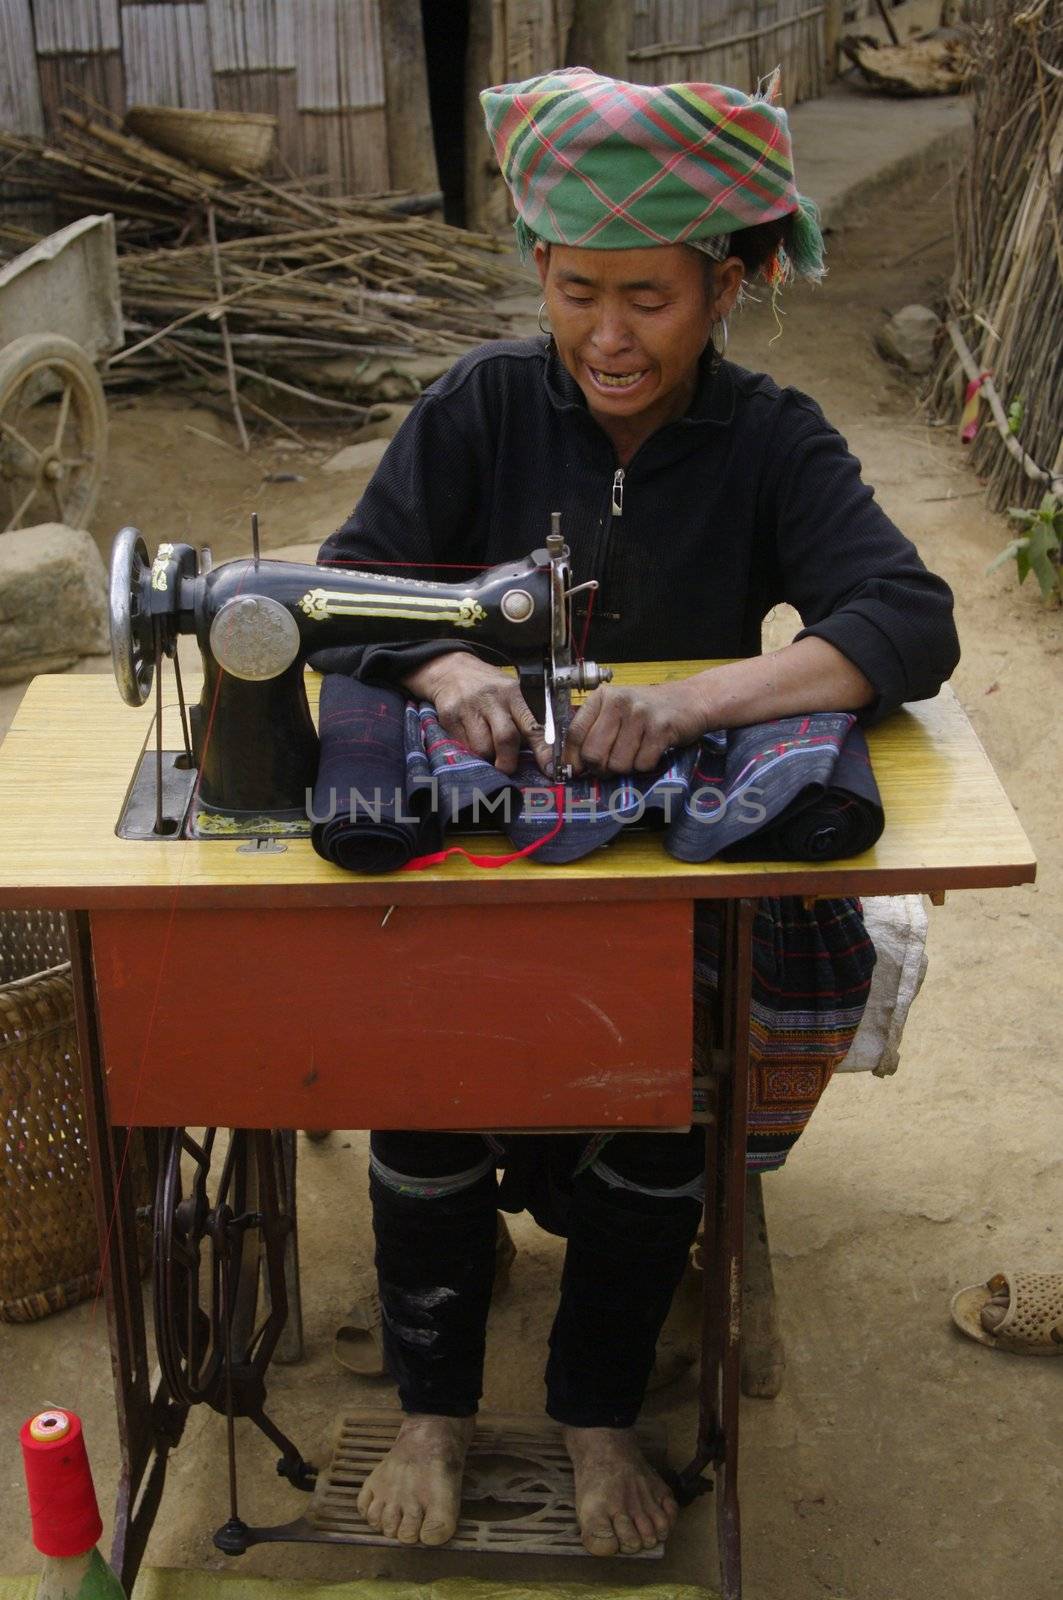 Black Hmong woman sewing machine by Duroc